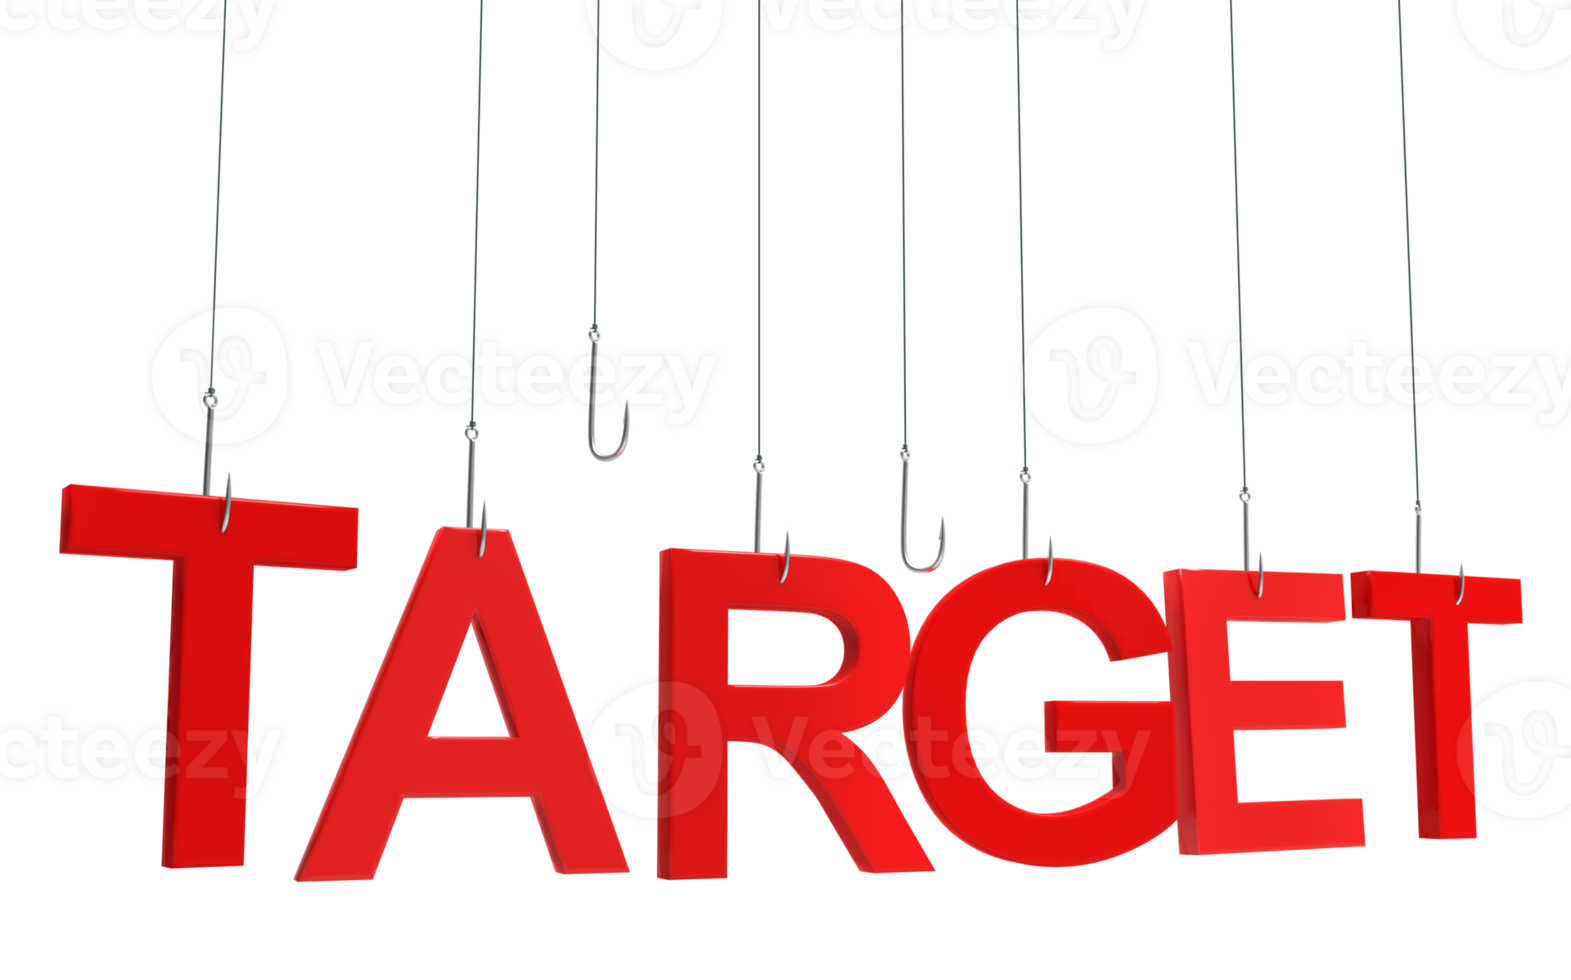 Target text hanging on a fishing hook png